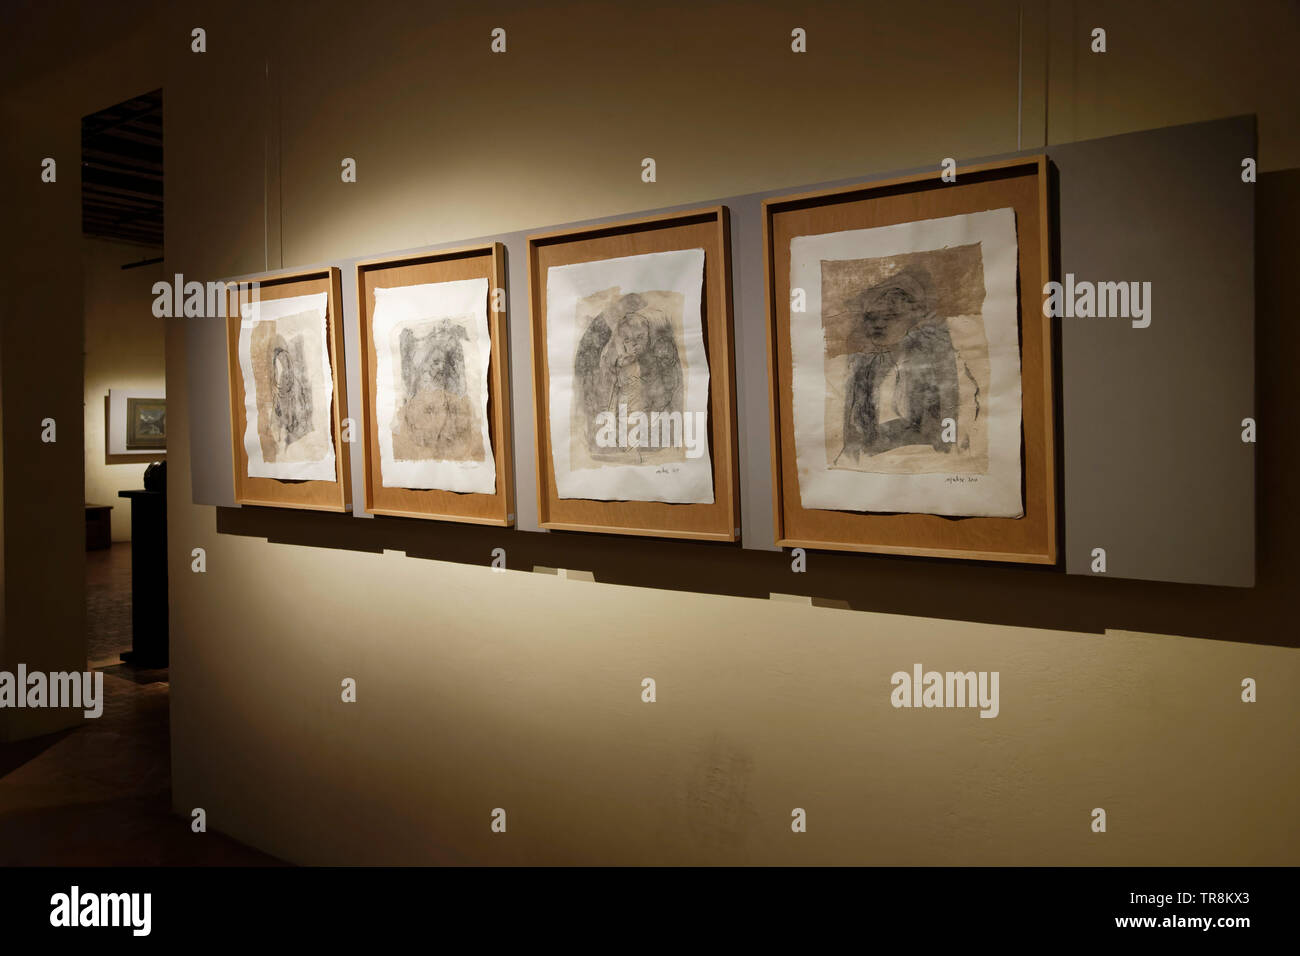 Tours, France.24th May,2019.Artworks of Madore at Exhibition Re-naissance(s) of the Capazza Gallery.©:Veronique Phitoussi/Alamy Stock Photo Stock Photo